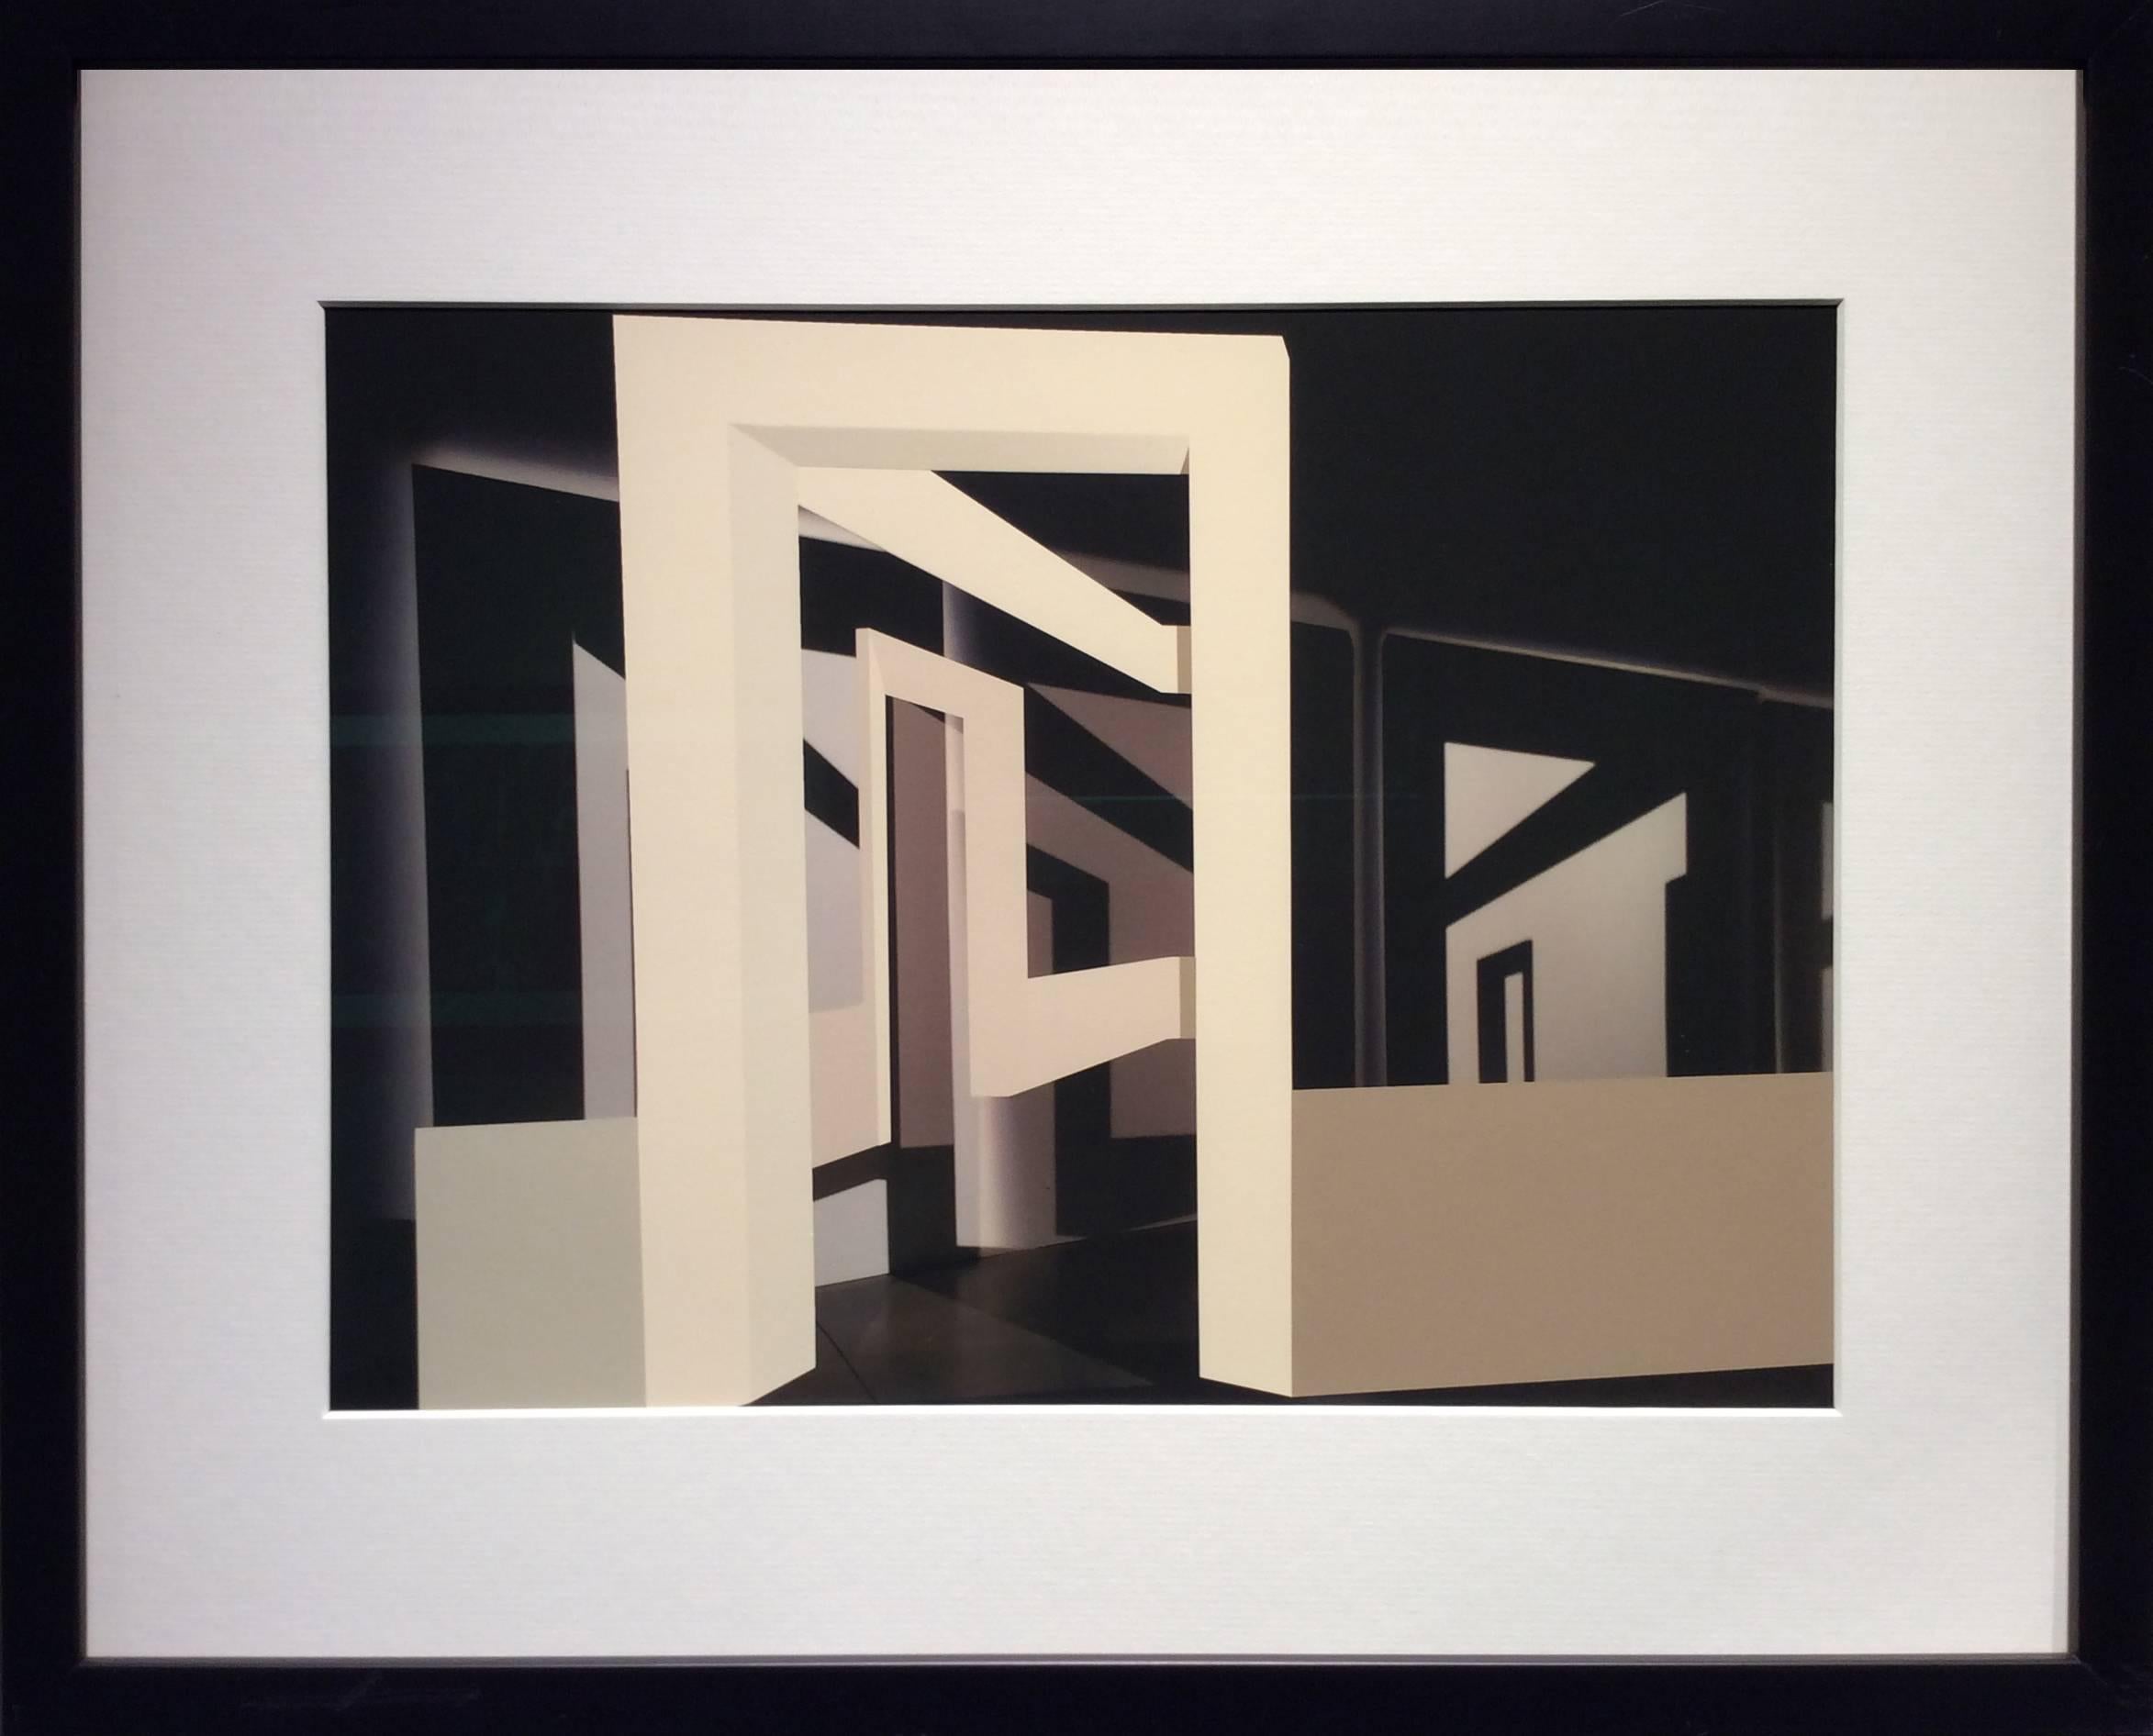 Many Arches (Contemporary Minimalist Architectural Inkjet Print in Black Frame) - Photograph by Stephanie Blumenthal